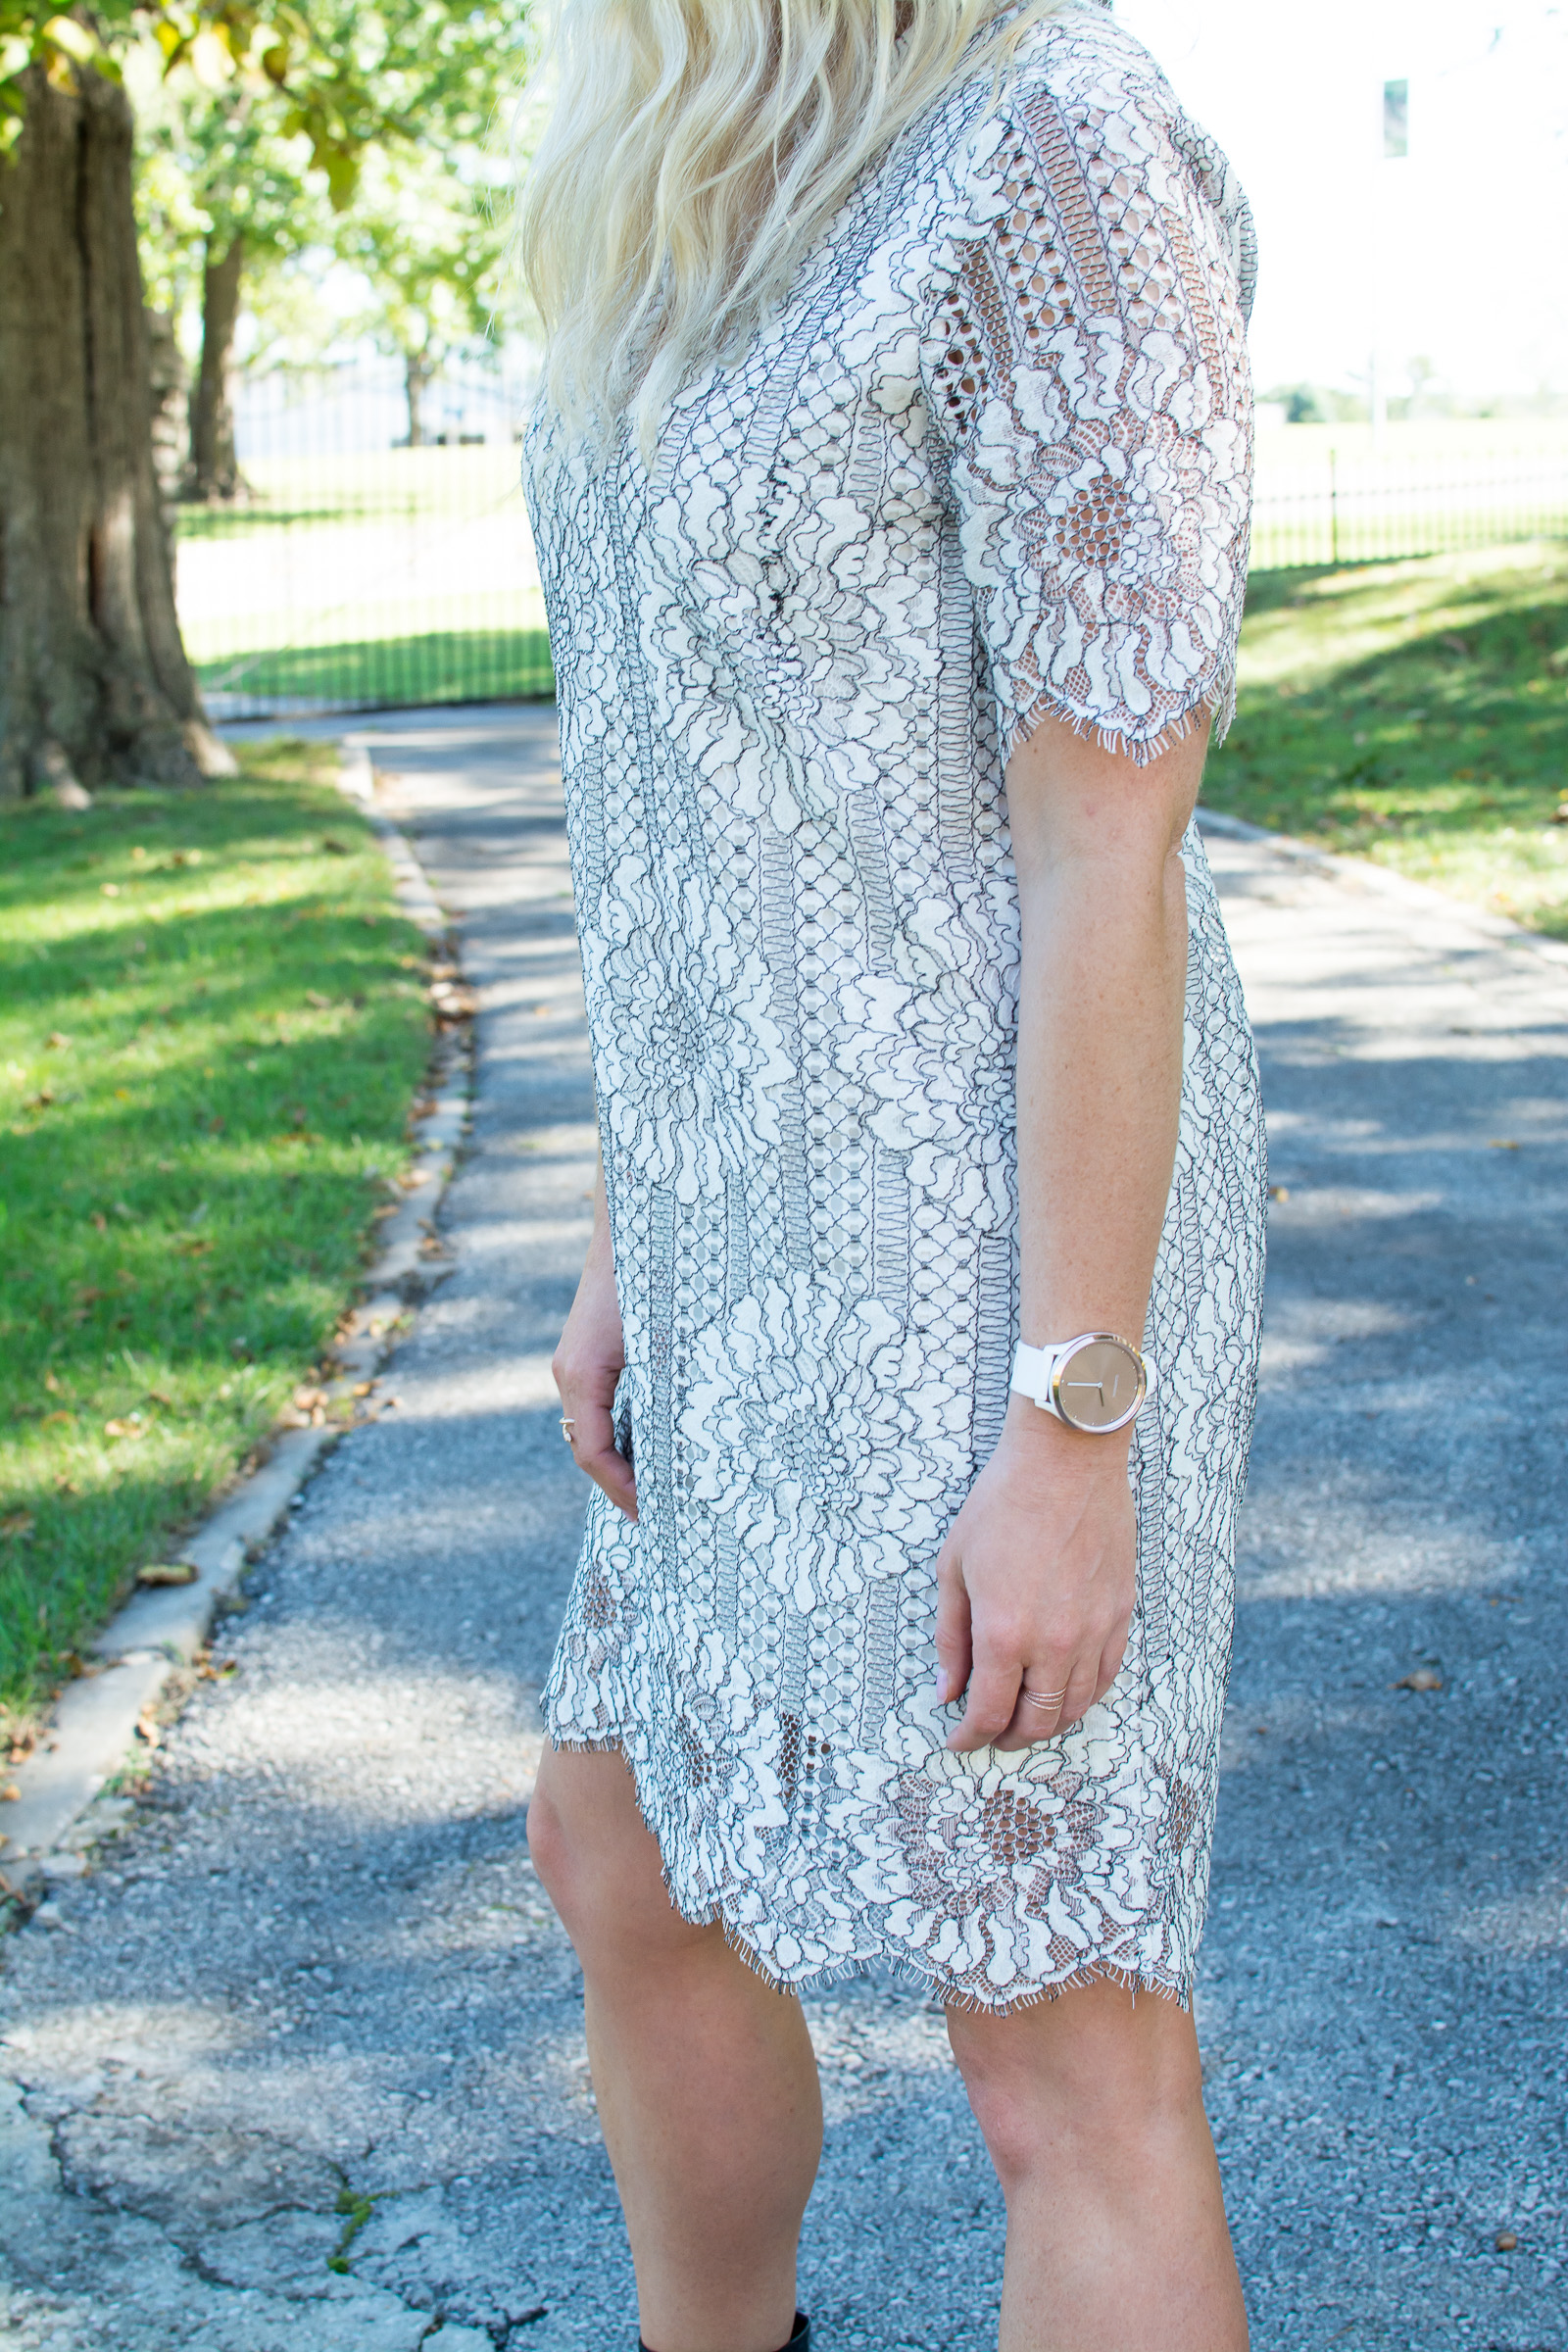 Wearing a White Lace Dress for Early Fall. | Ashley from LSR